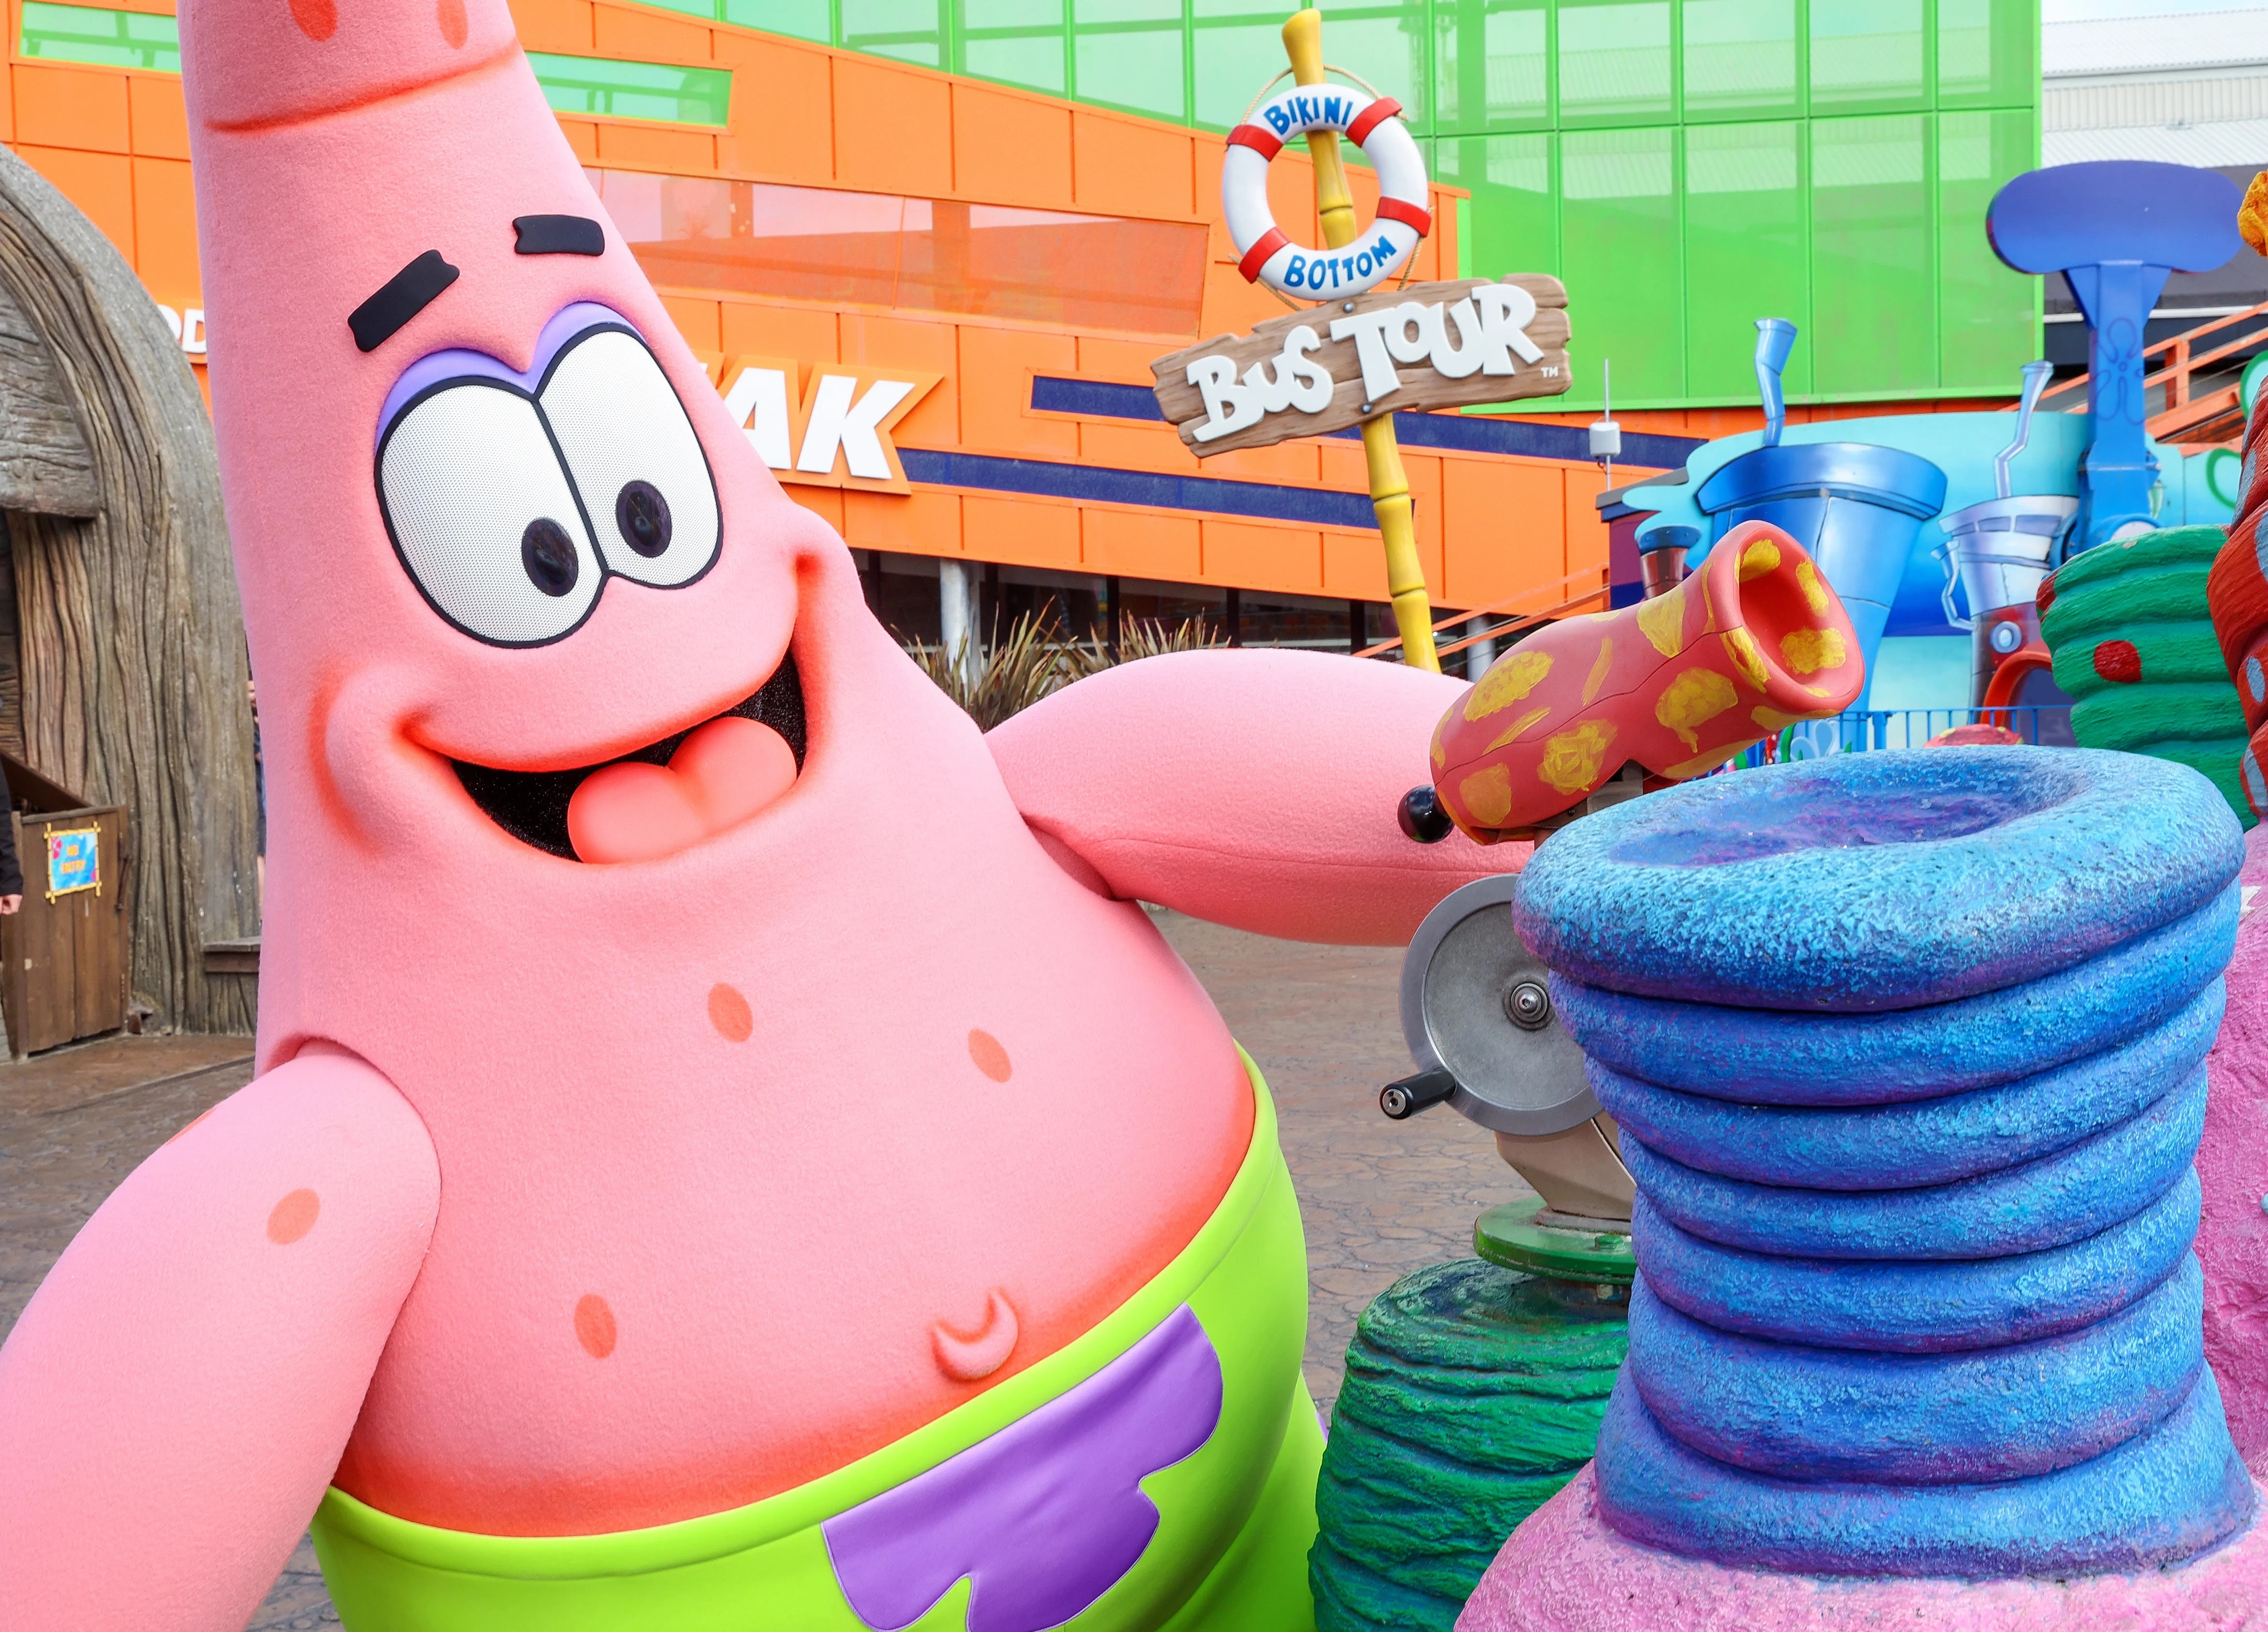 NickALive!: Patrick Star and Family Arrive Land on 'Roblox Islands